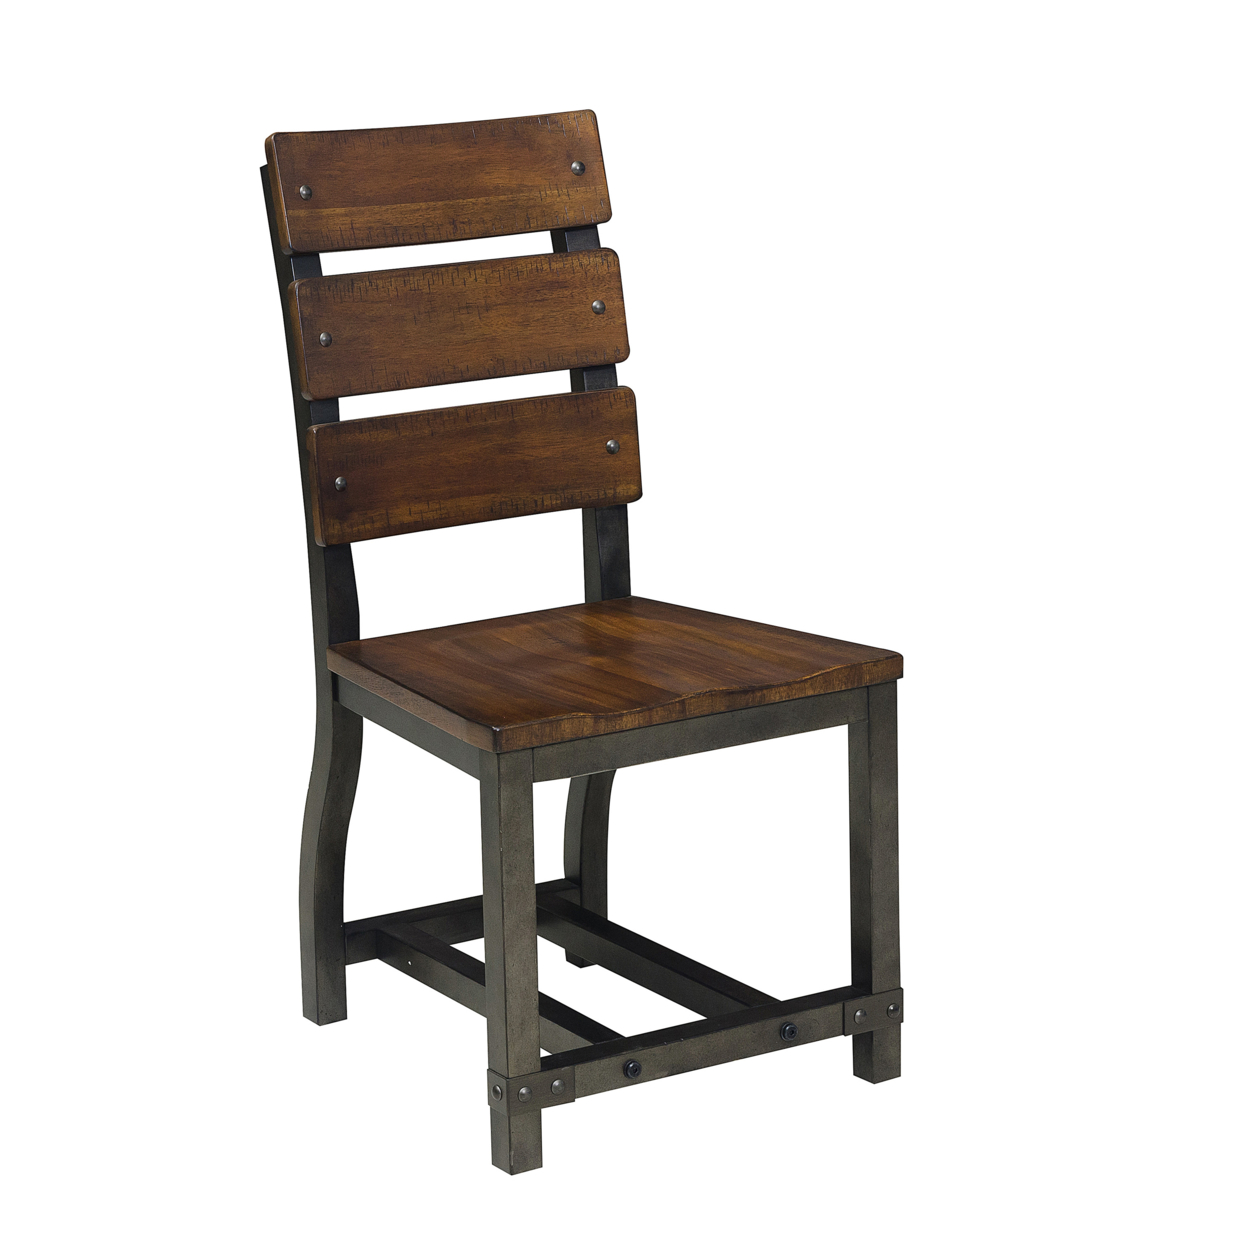 Wooden Side Chair With Metal Block Legs And Curved Back, Brown- Saltoro Sherpi